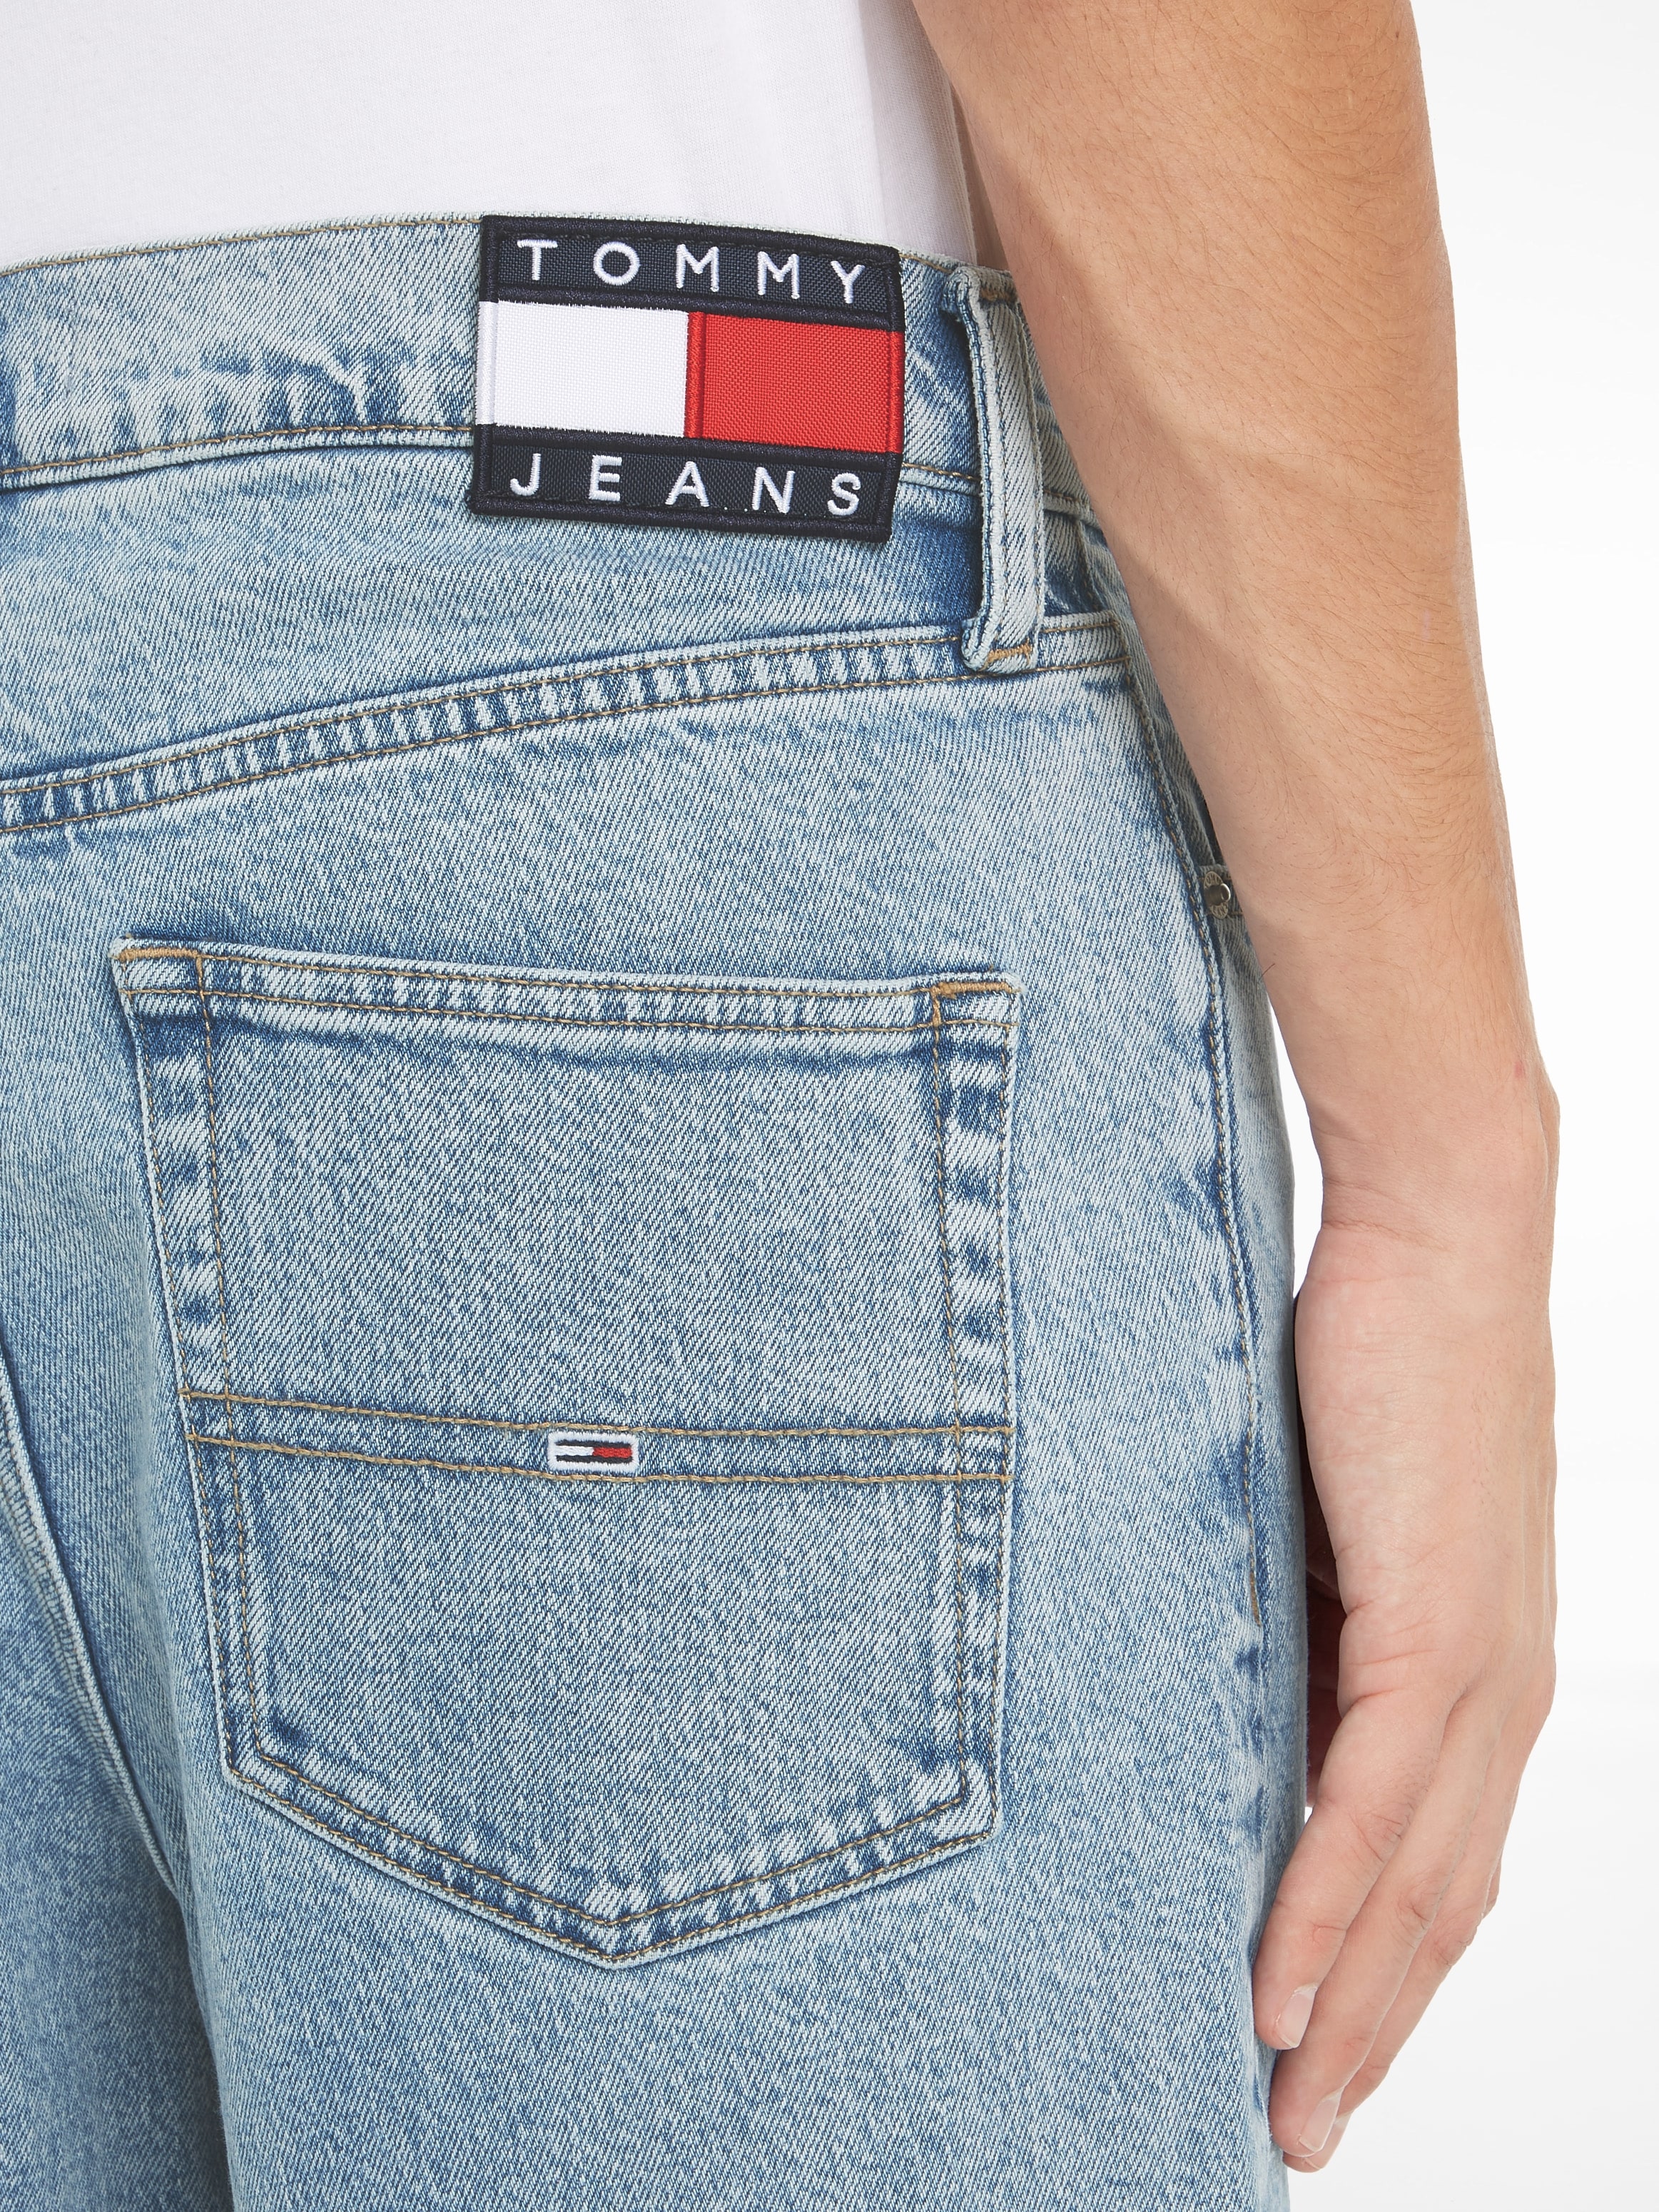 Tommy Jeans 5-Pocket-Jeans »BAX LOOSE TPRD CG4114« kaufen bei OTTO